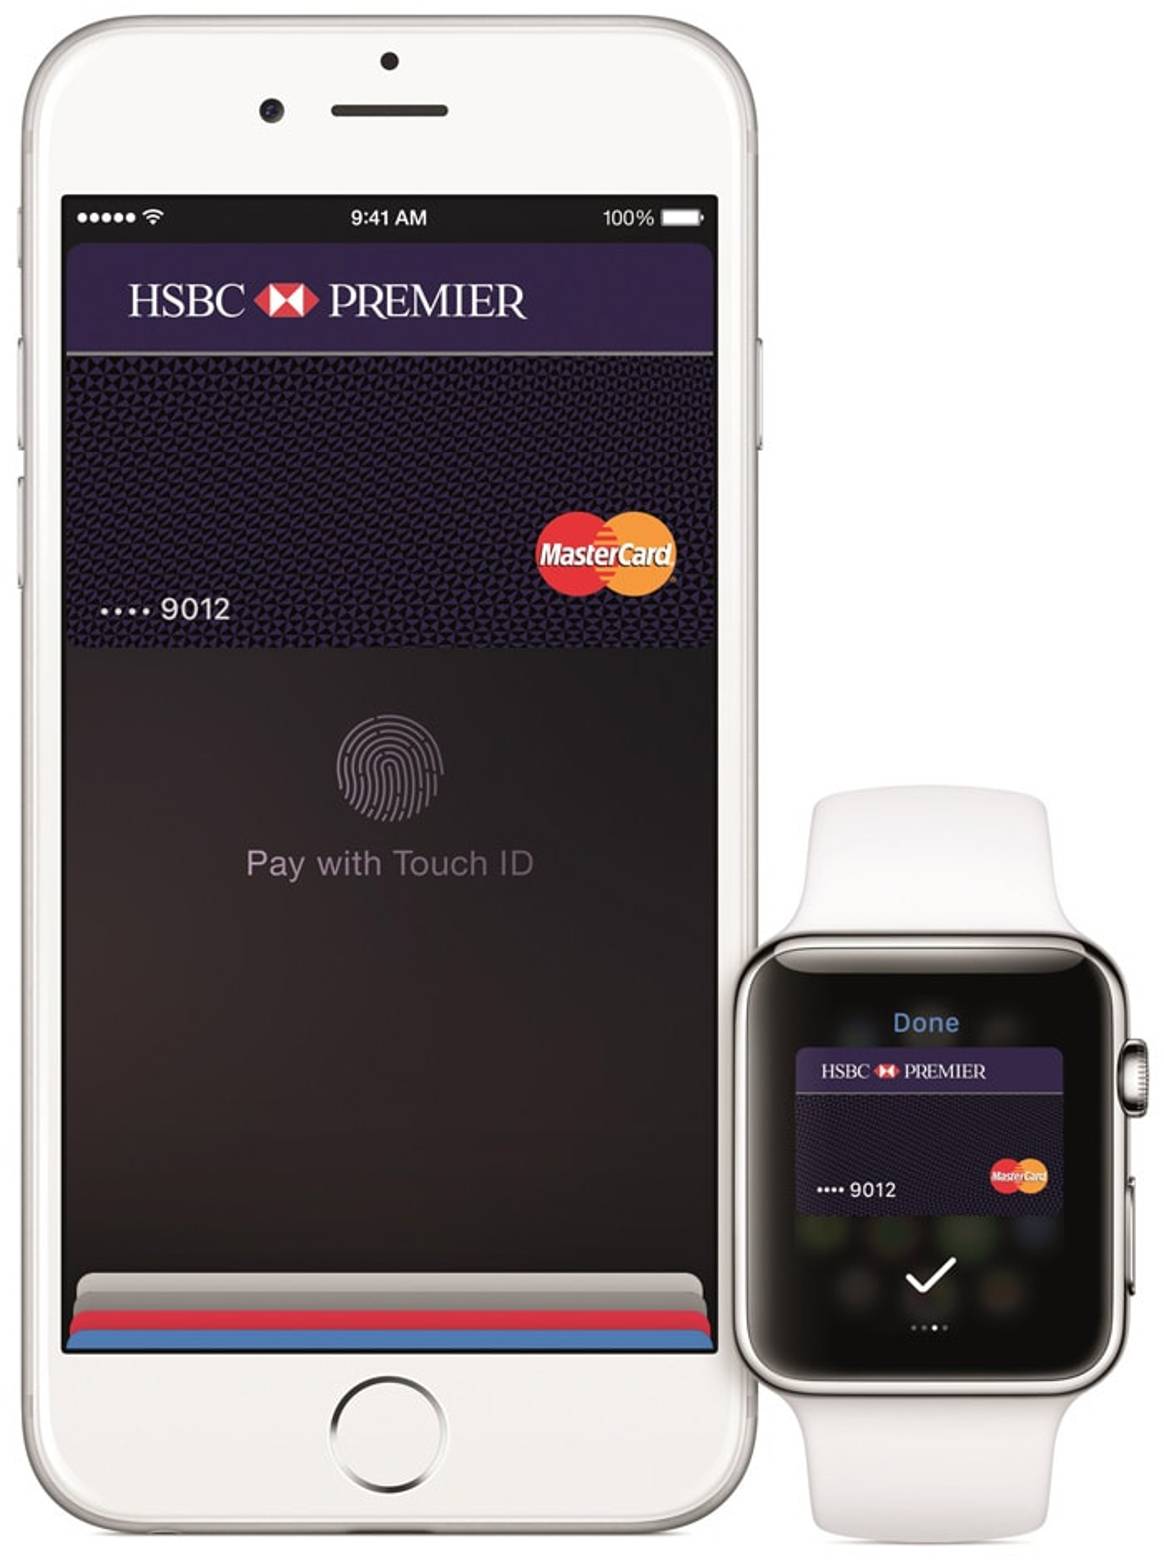 Apple Pay officially goes live in the UK